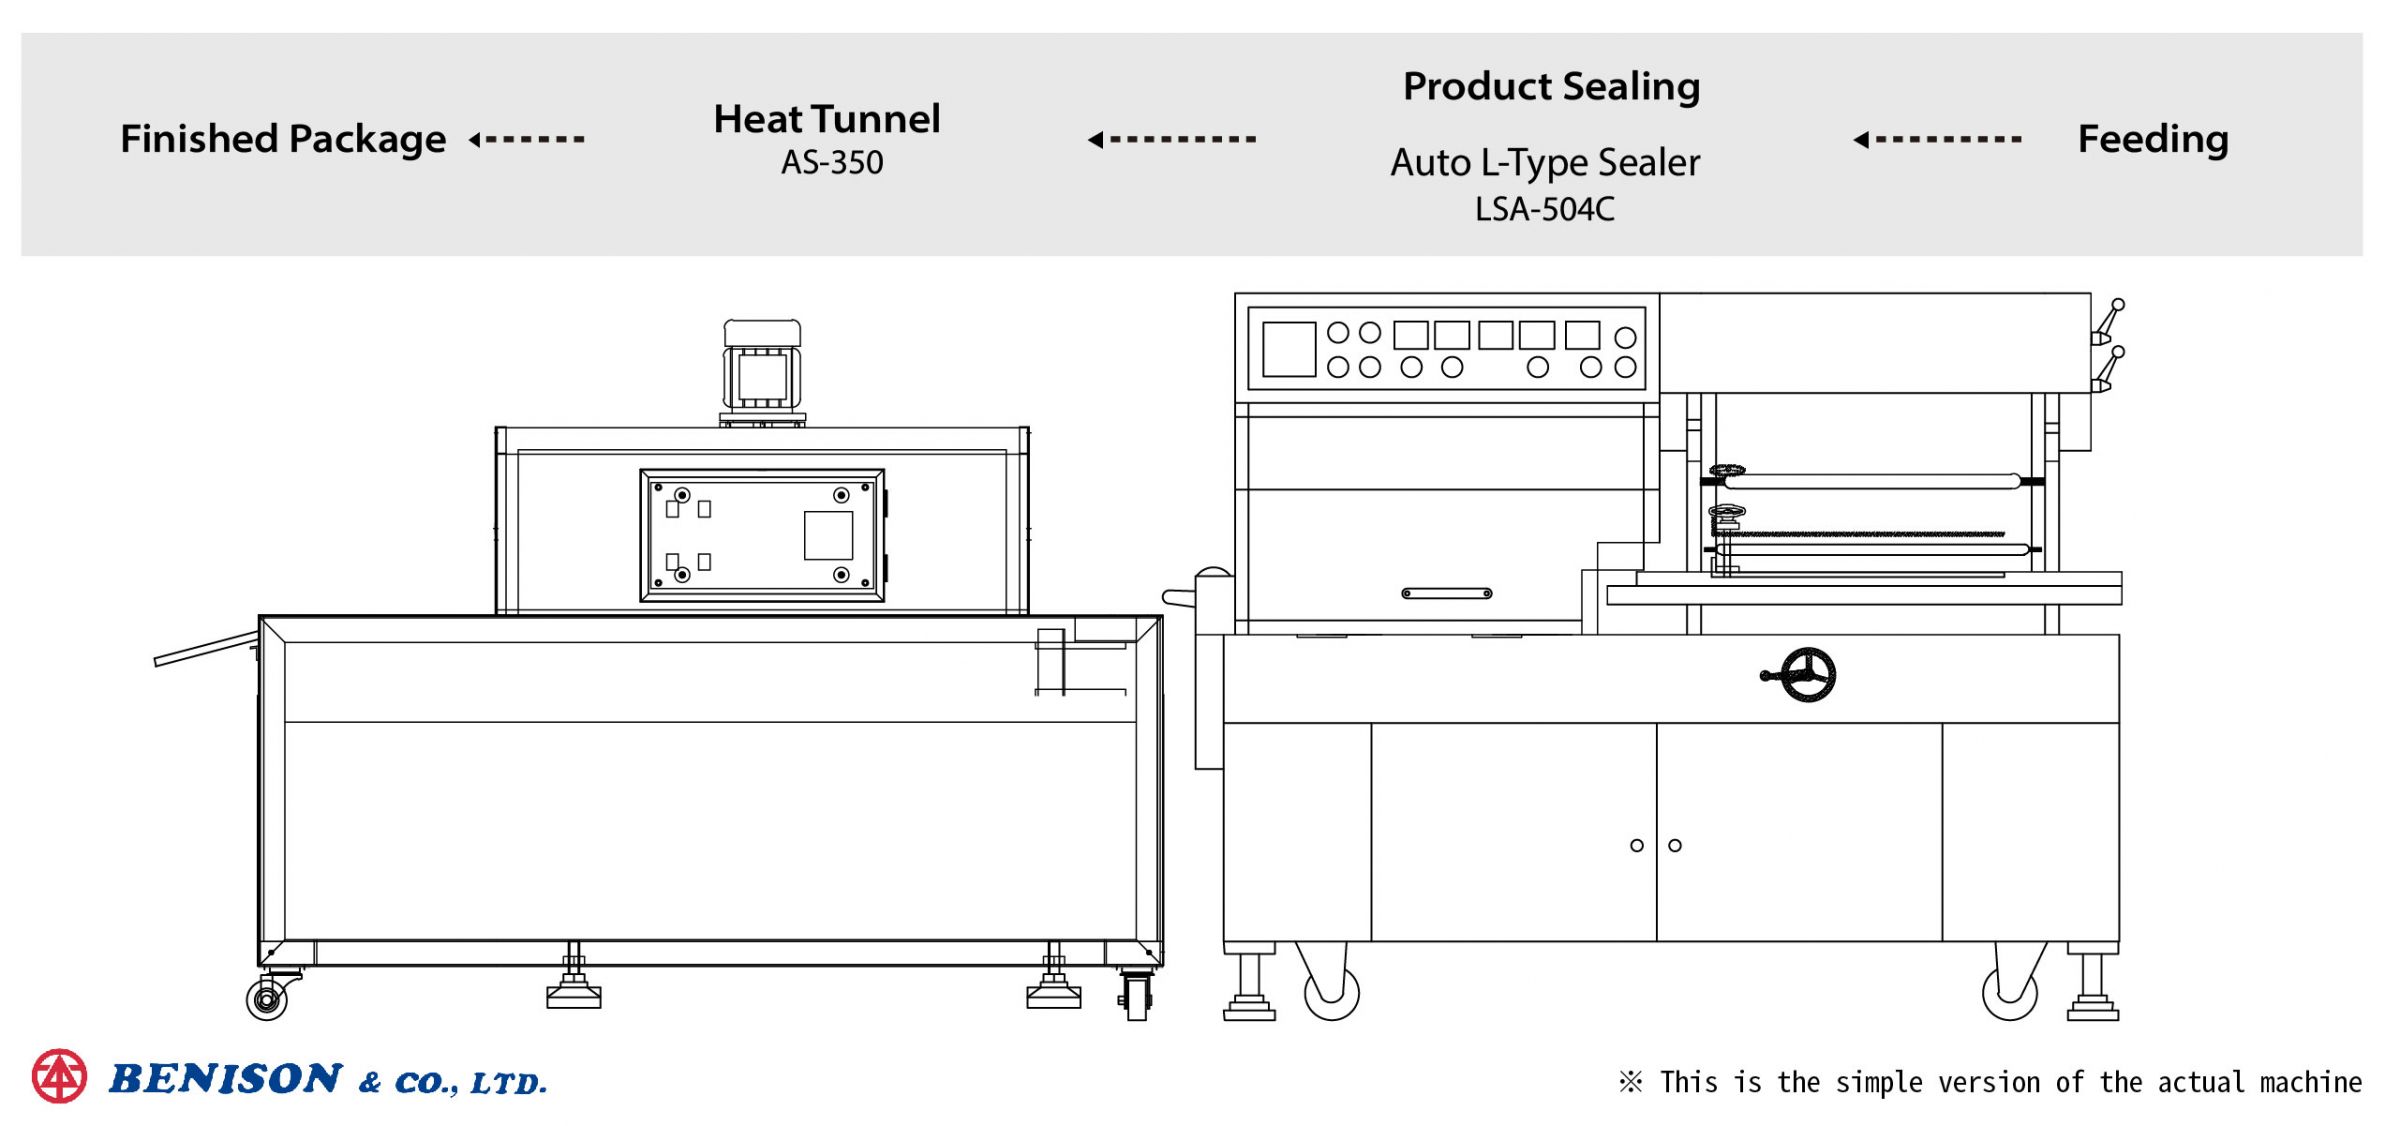 Household Production Line Planning, LSA-504C+AS-350